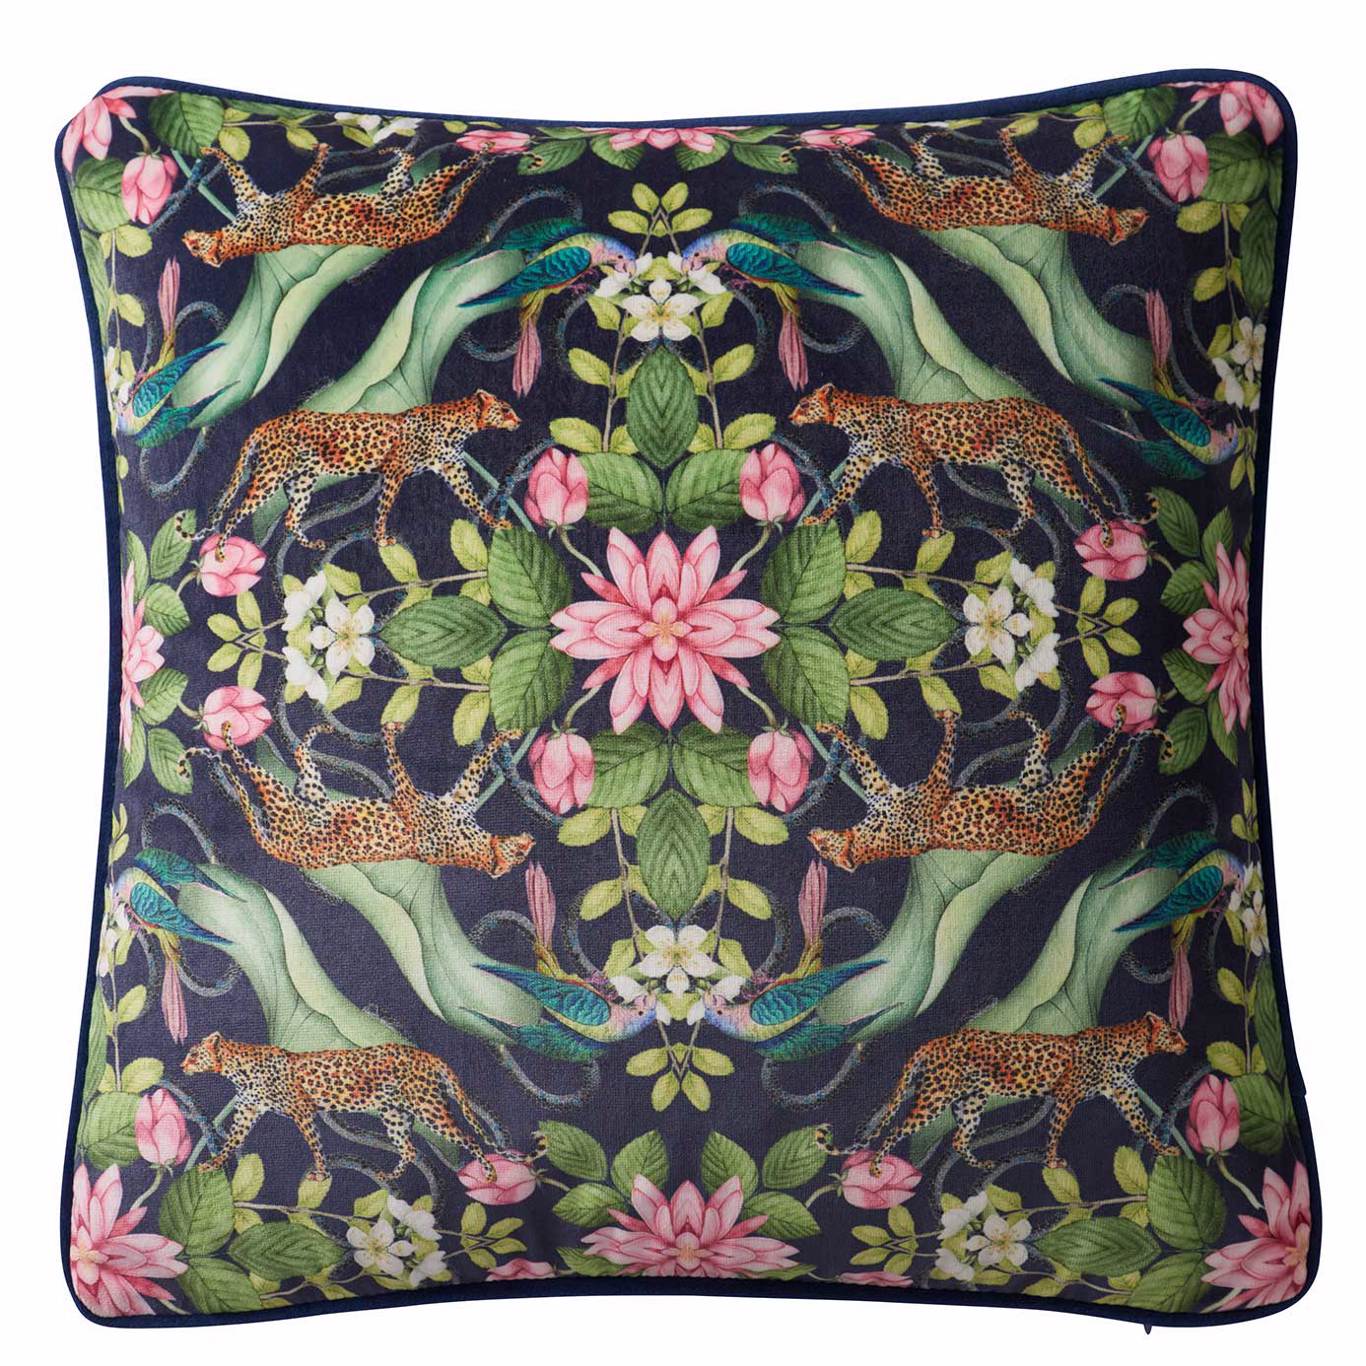 Menagerie Cushion Midnight Bedding by CNC